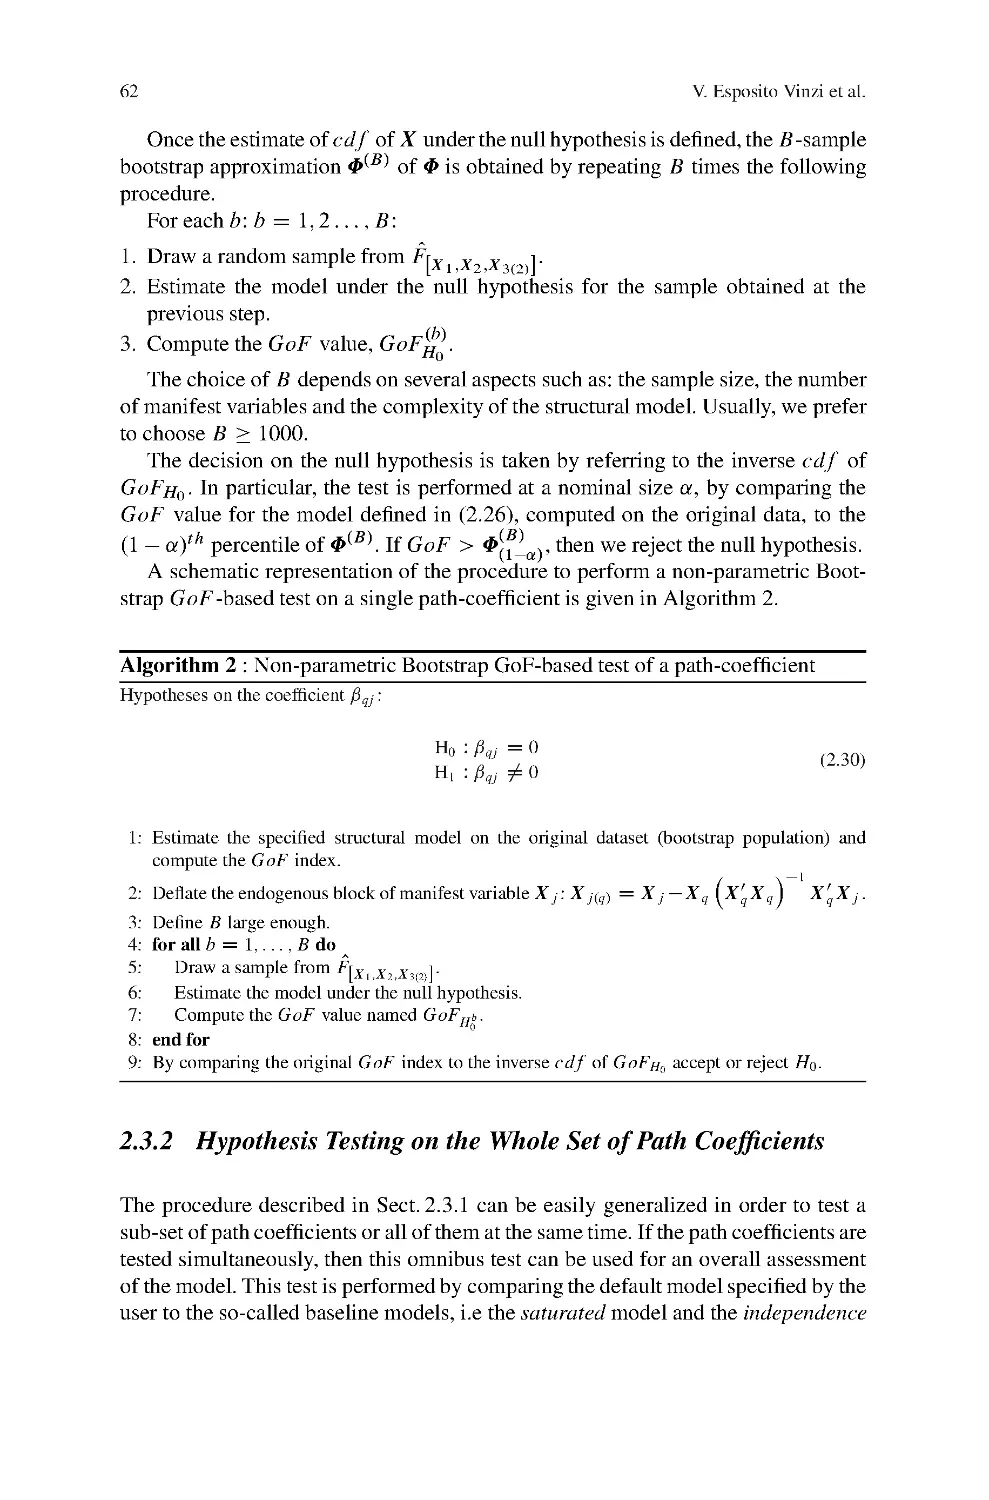 2.3.2 Hypothesis Testing on the Whole Set of Path Coefficients